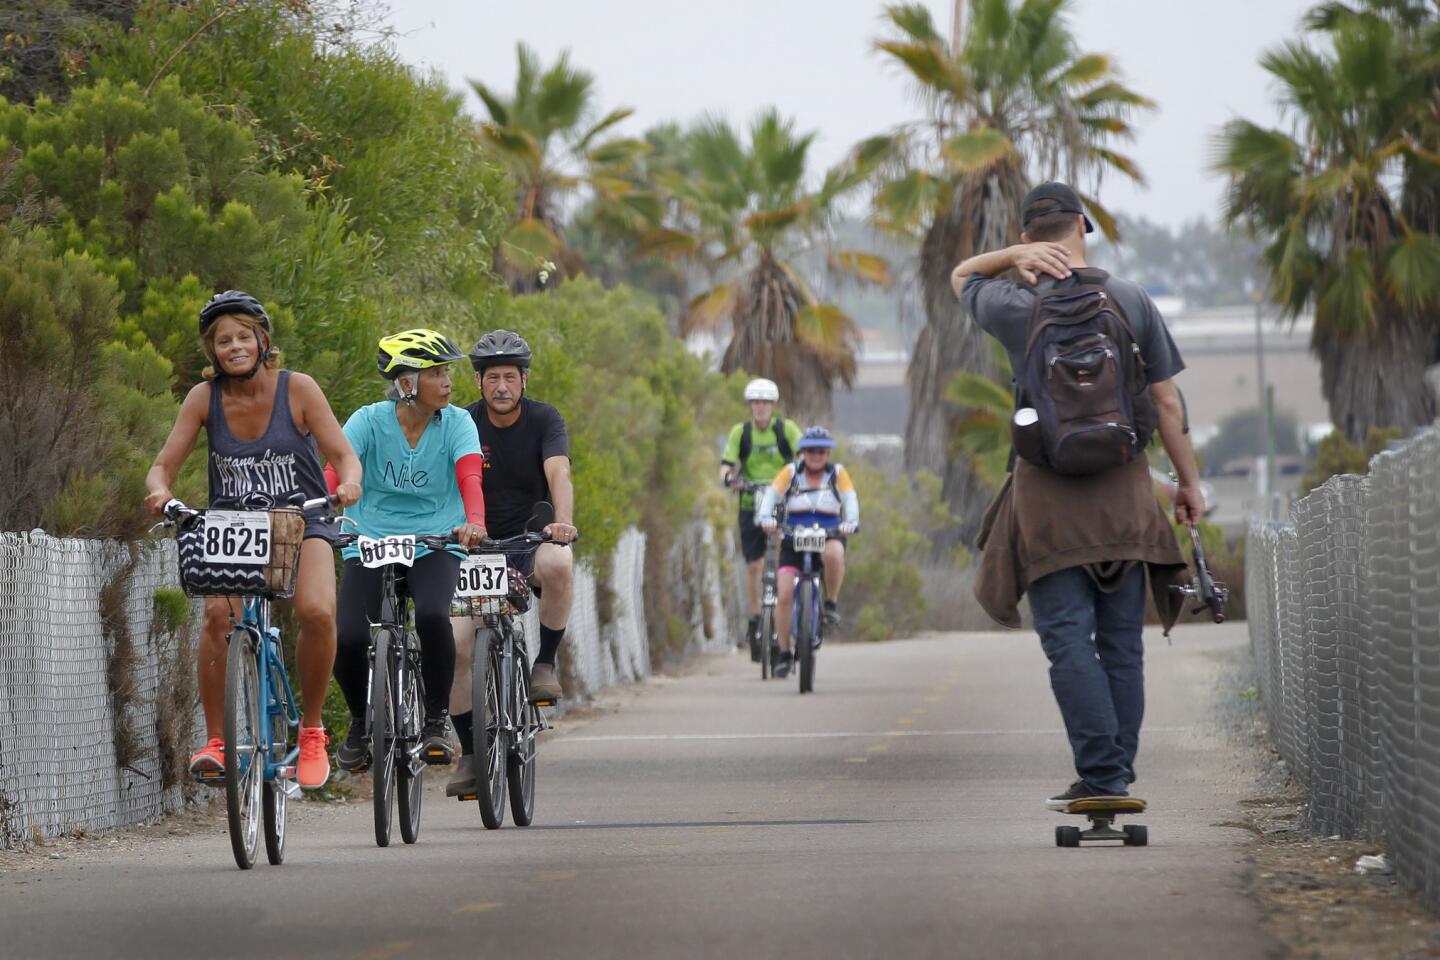 Bike the Bay fundraiser sends waves of cyclists over the Coronado